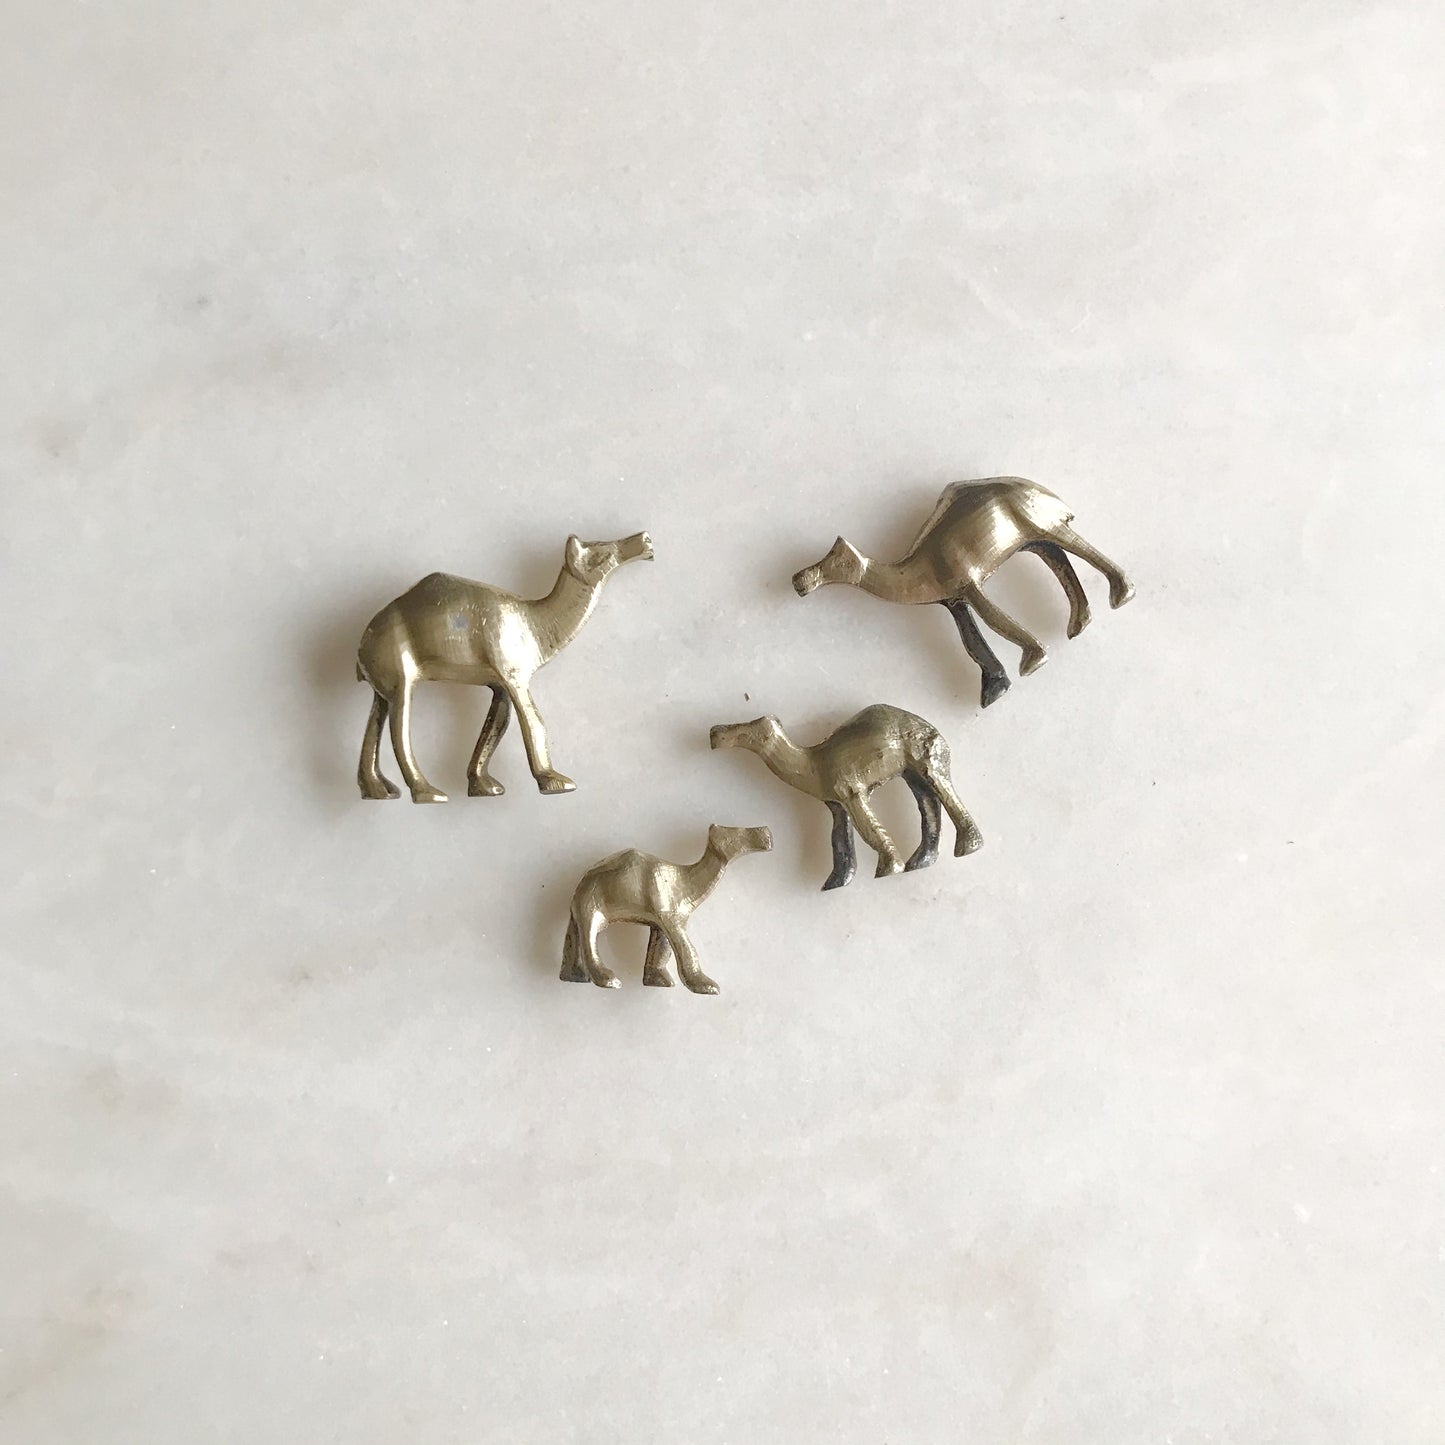 Collection of Small Vintage Brass Camels